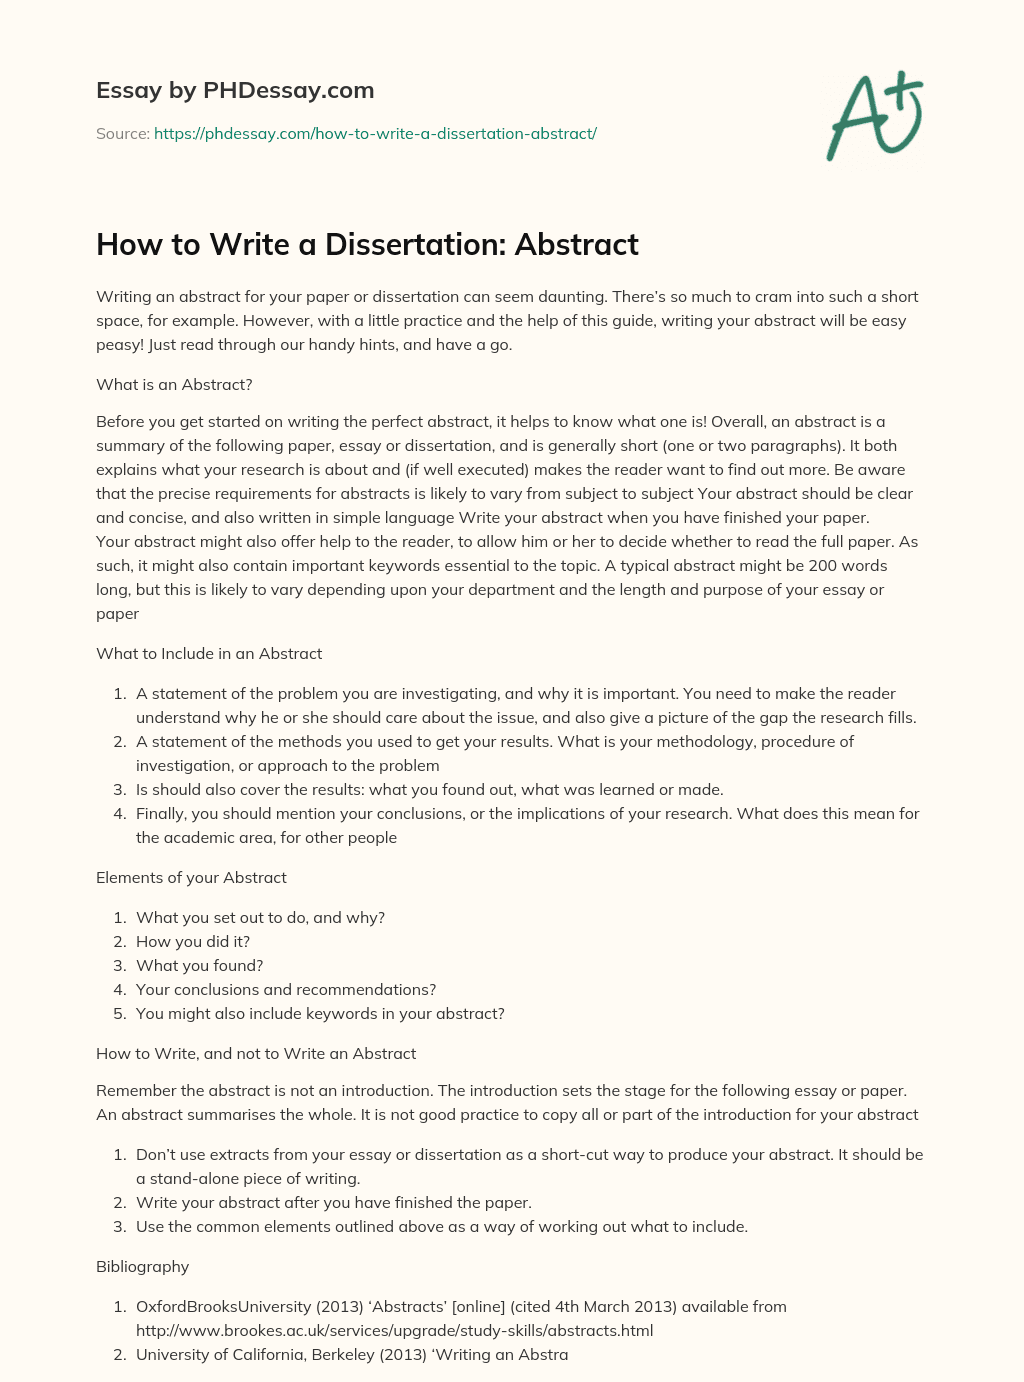 How to Write a Dissertation: Abstract essay